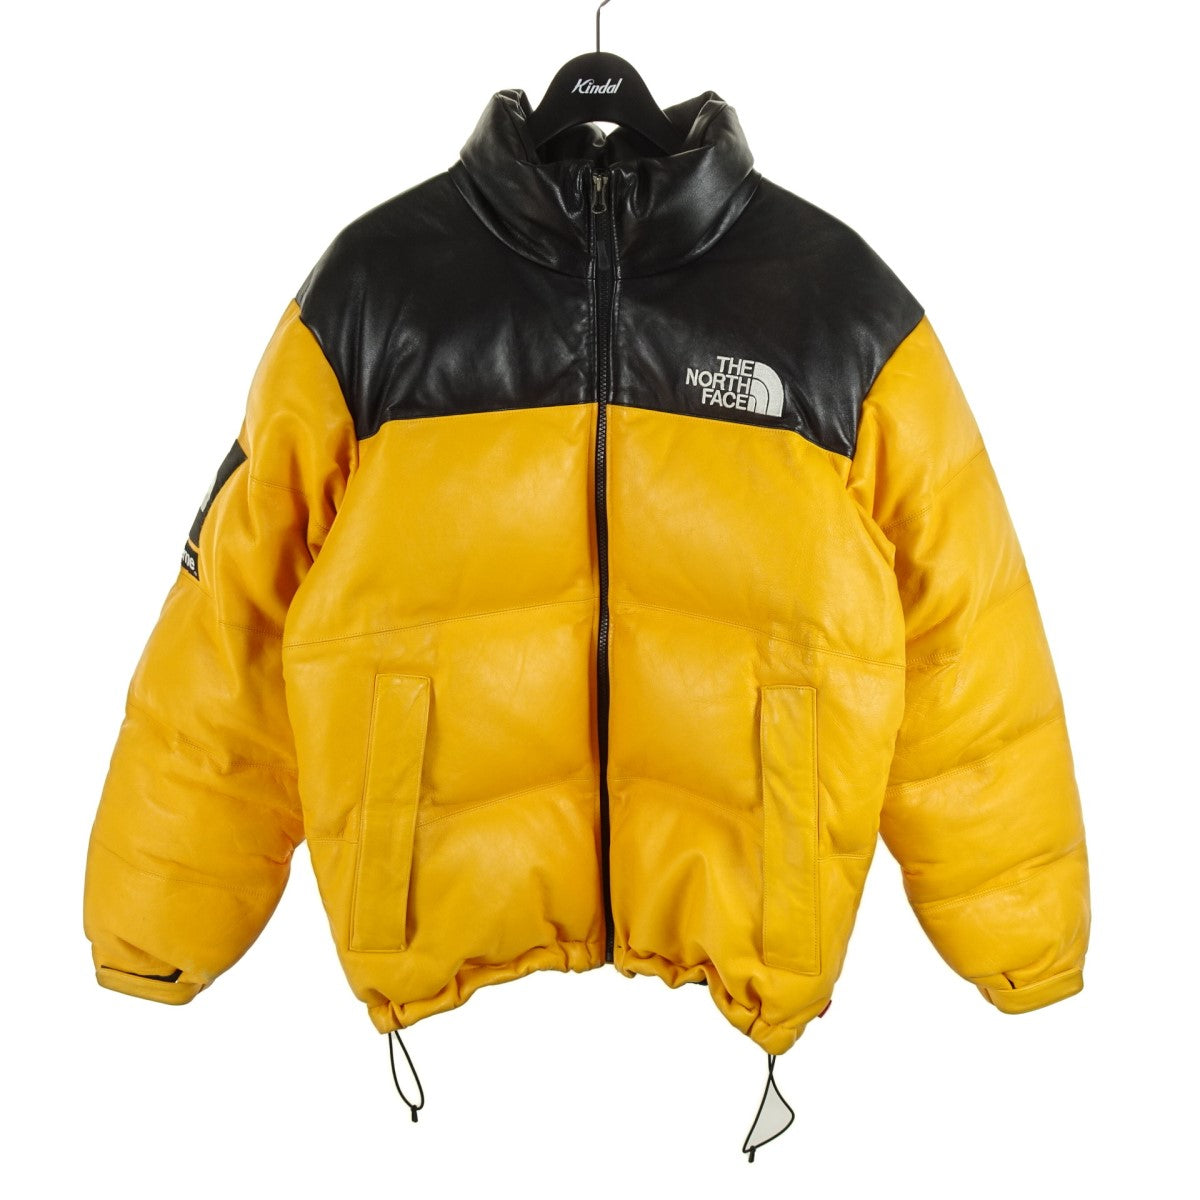 THE NORTH FACE×Supreme LEATHER NUPTSE JACKET 17AW NF0A3CAD 